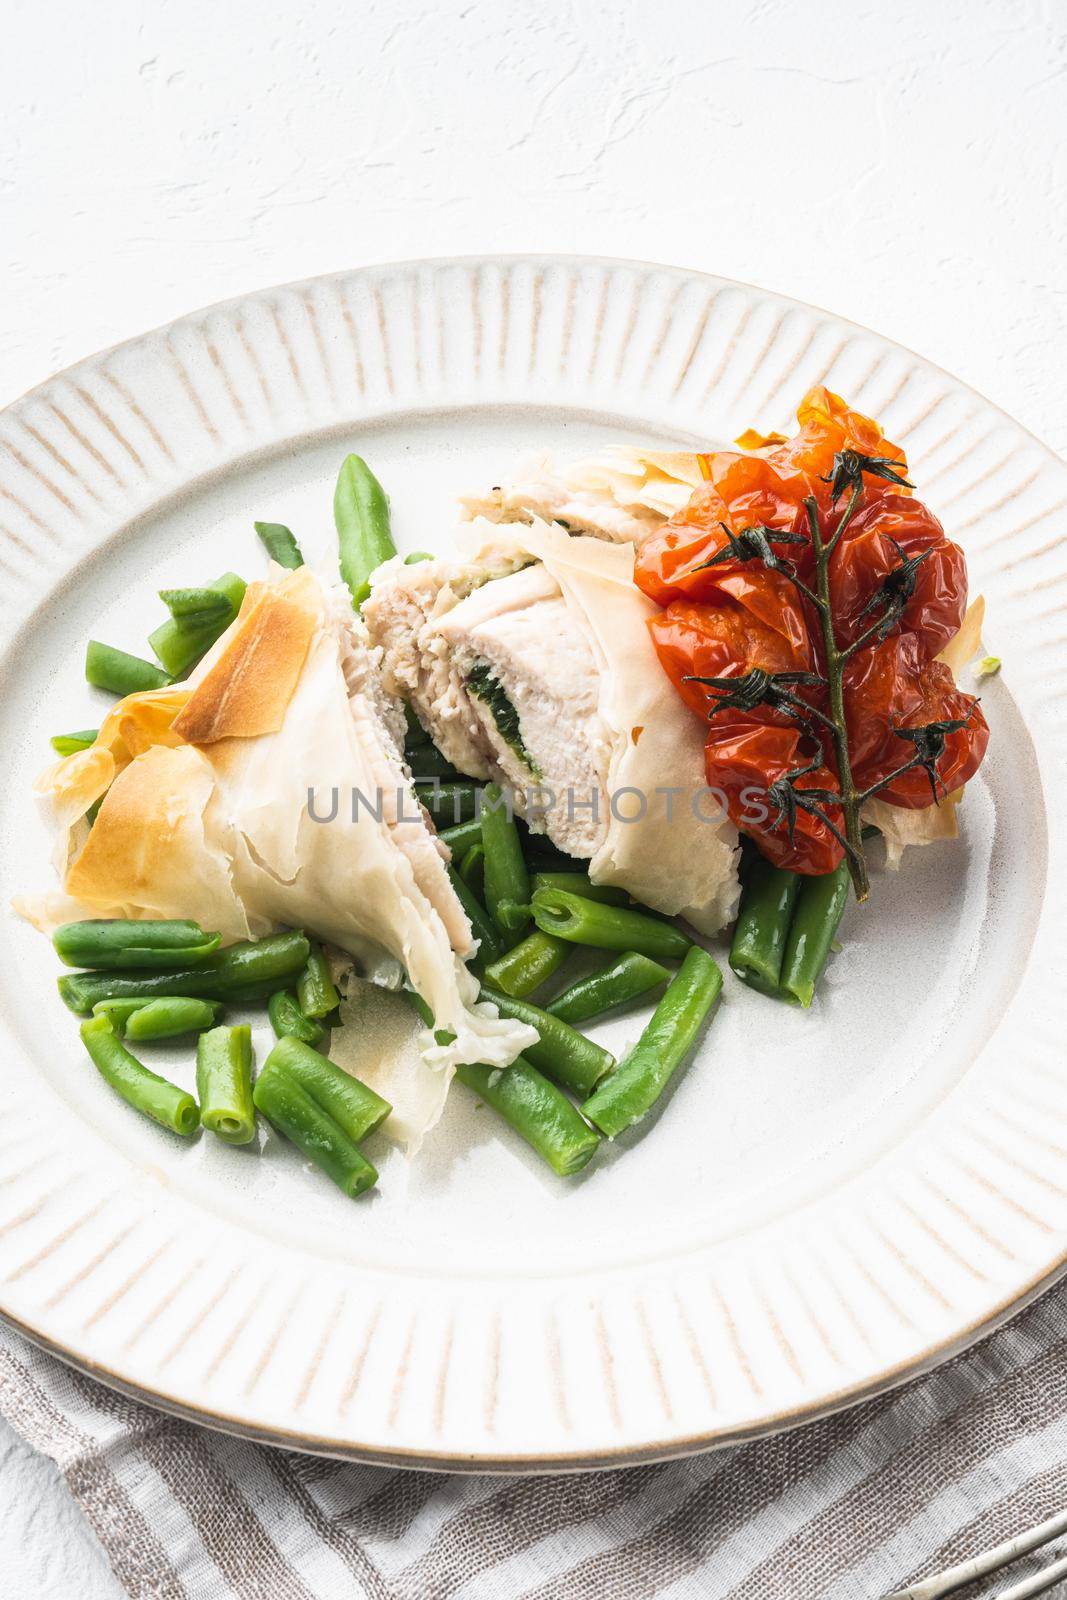 Freshly cooked Chicken Kiev oozing garlic and parsley butter set, with baked cherry tomatoes And green beans, on white stone background